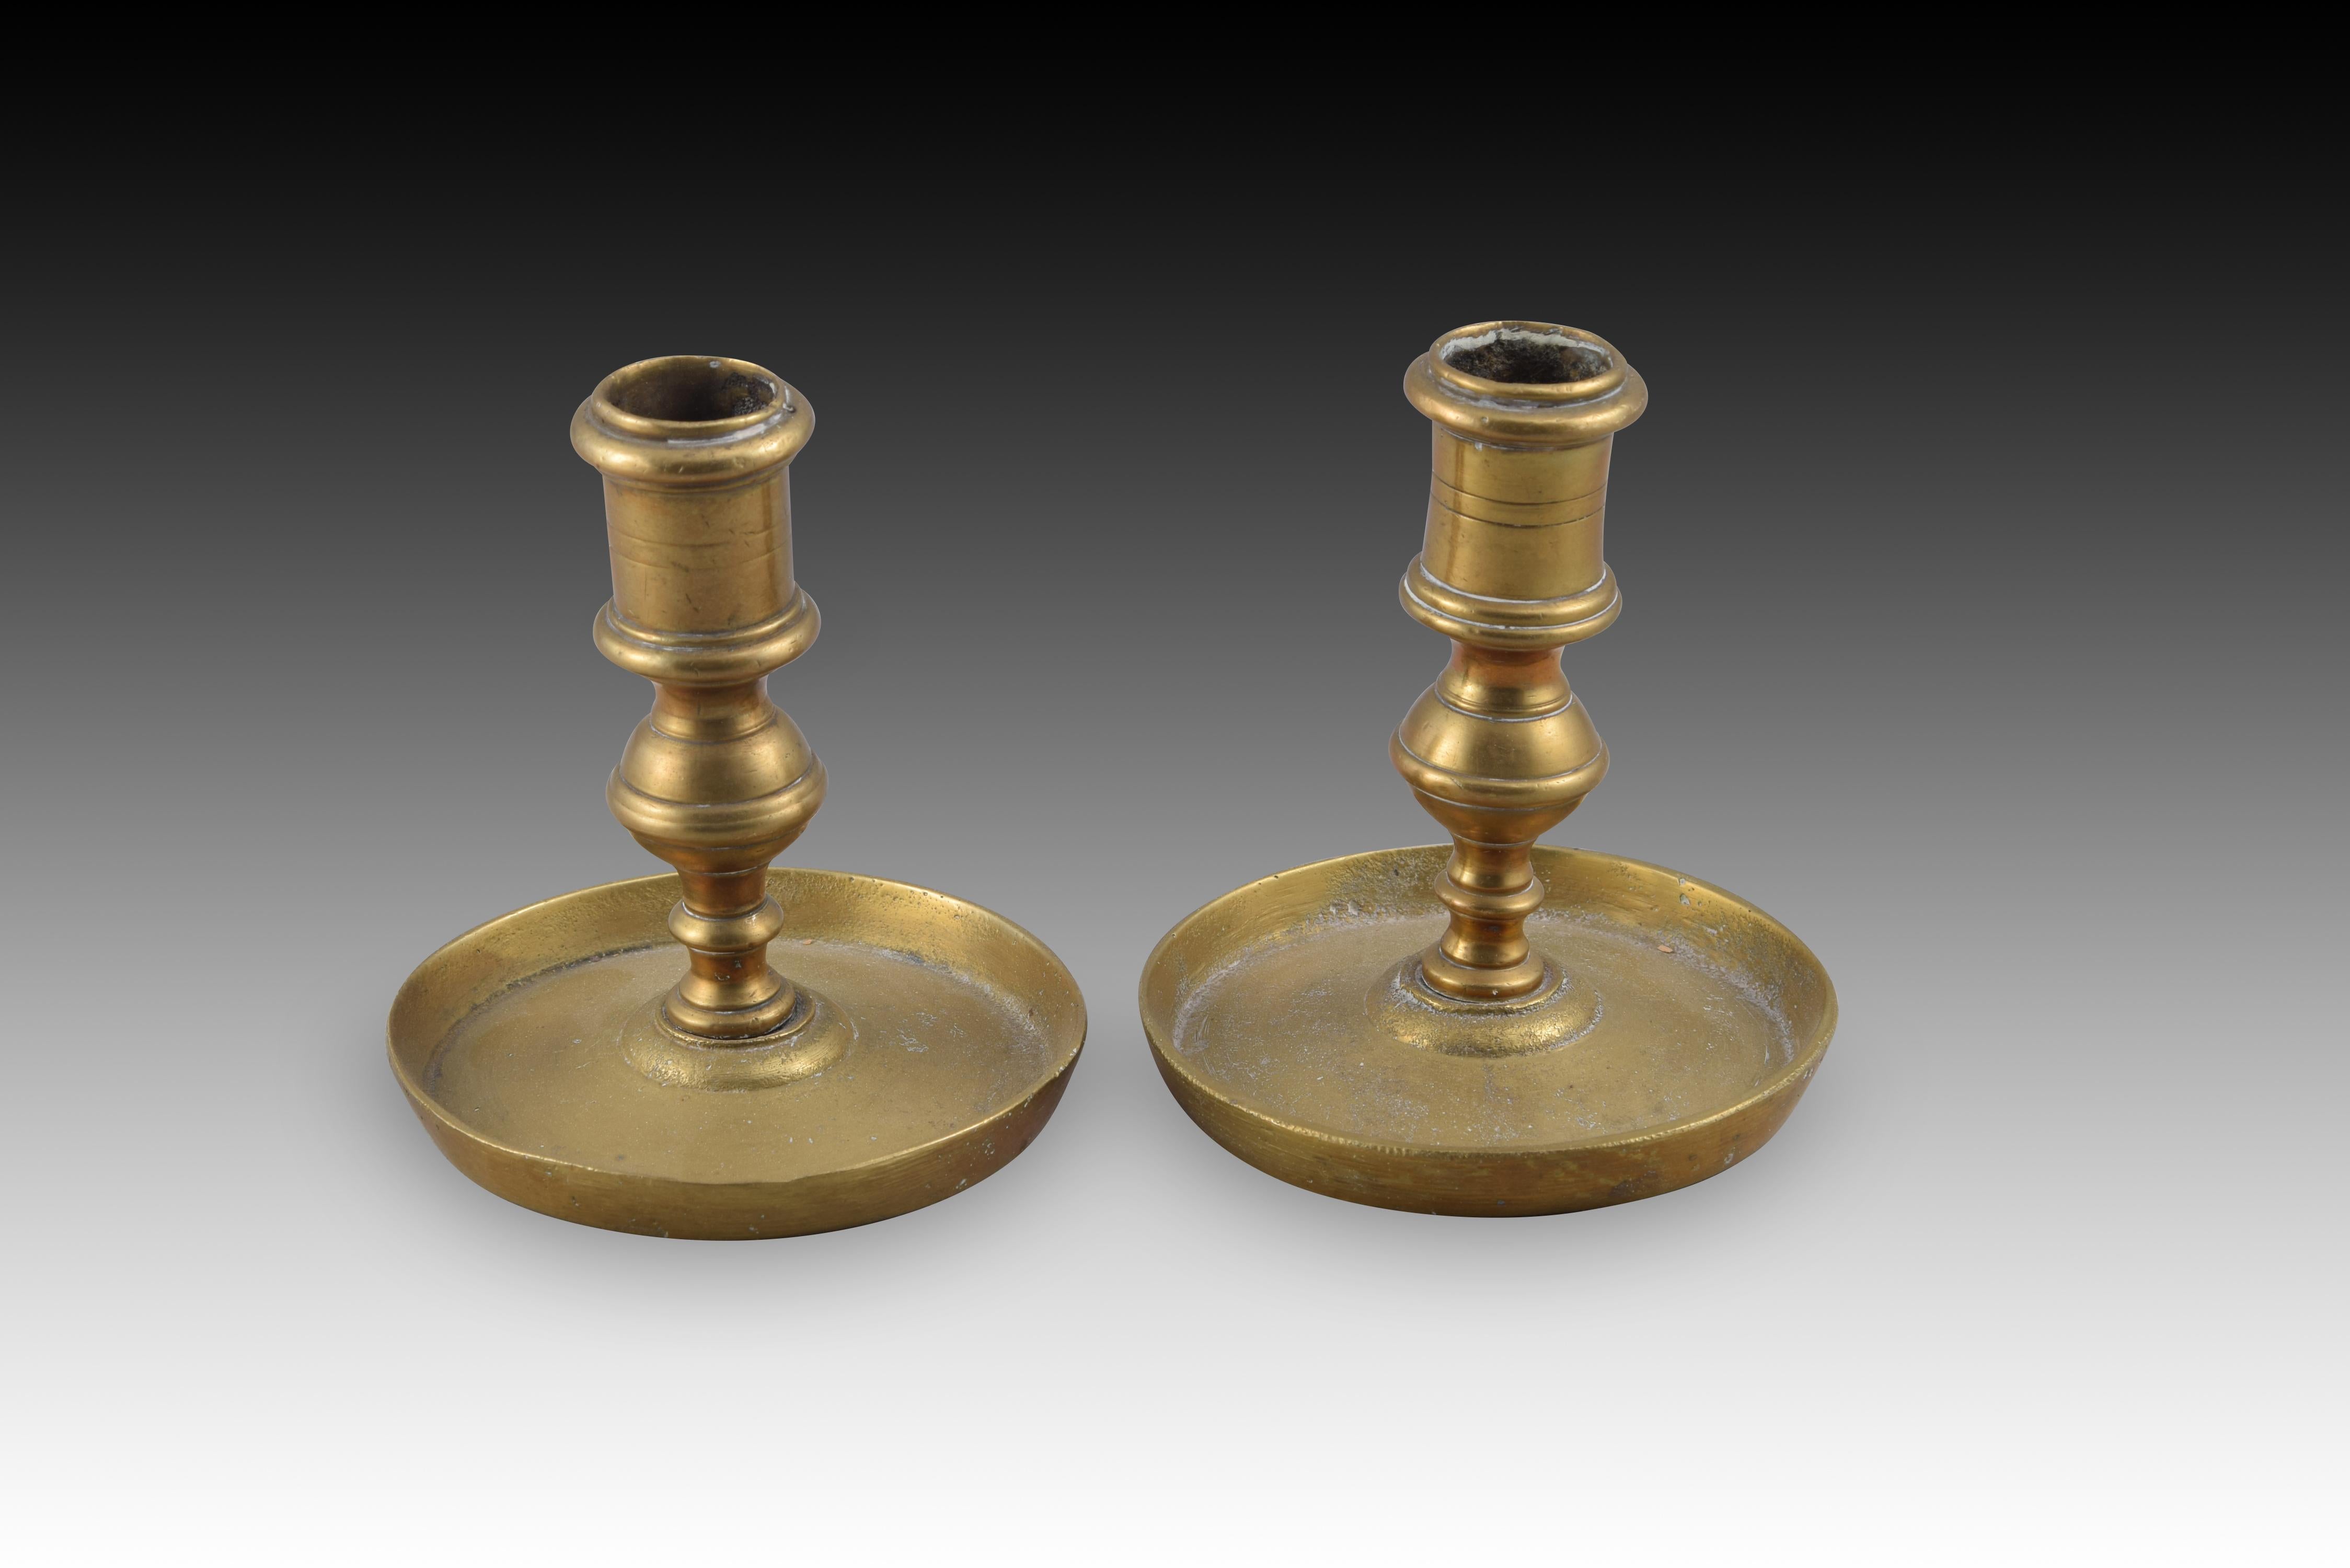 Pair of candlesticks. Bronze. 19th century.
 Pair of bronze candlesticks that have a circular base with a raised edge, a spherical-shaped axis in the center and several moldings of different sizes and tubular lighters raised above and below. This